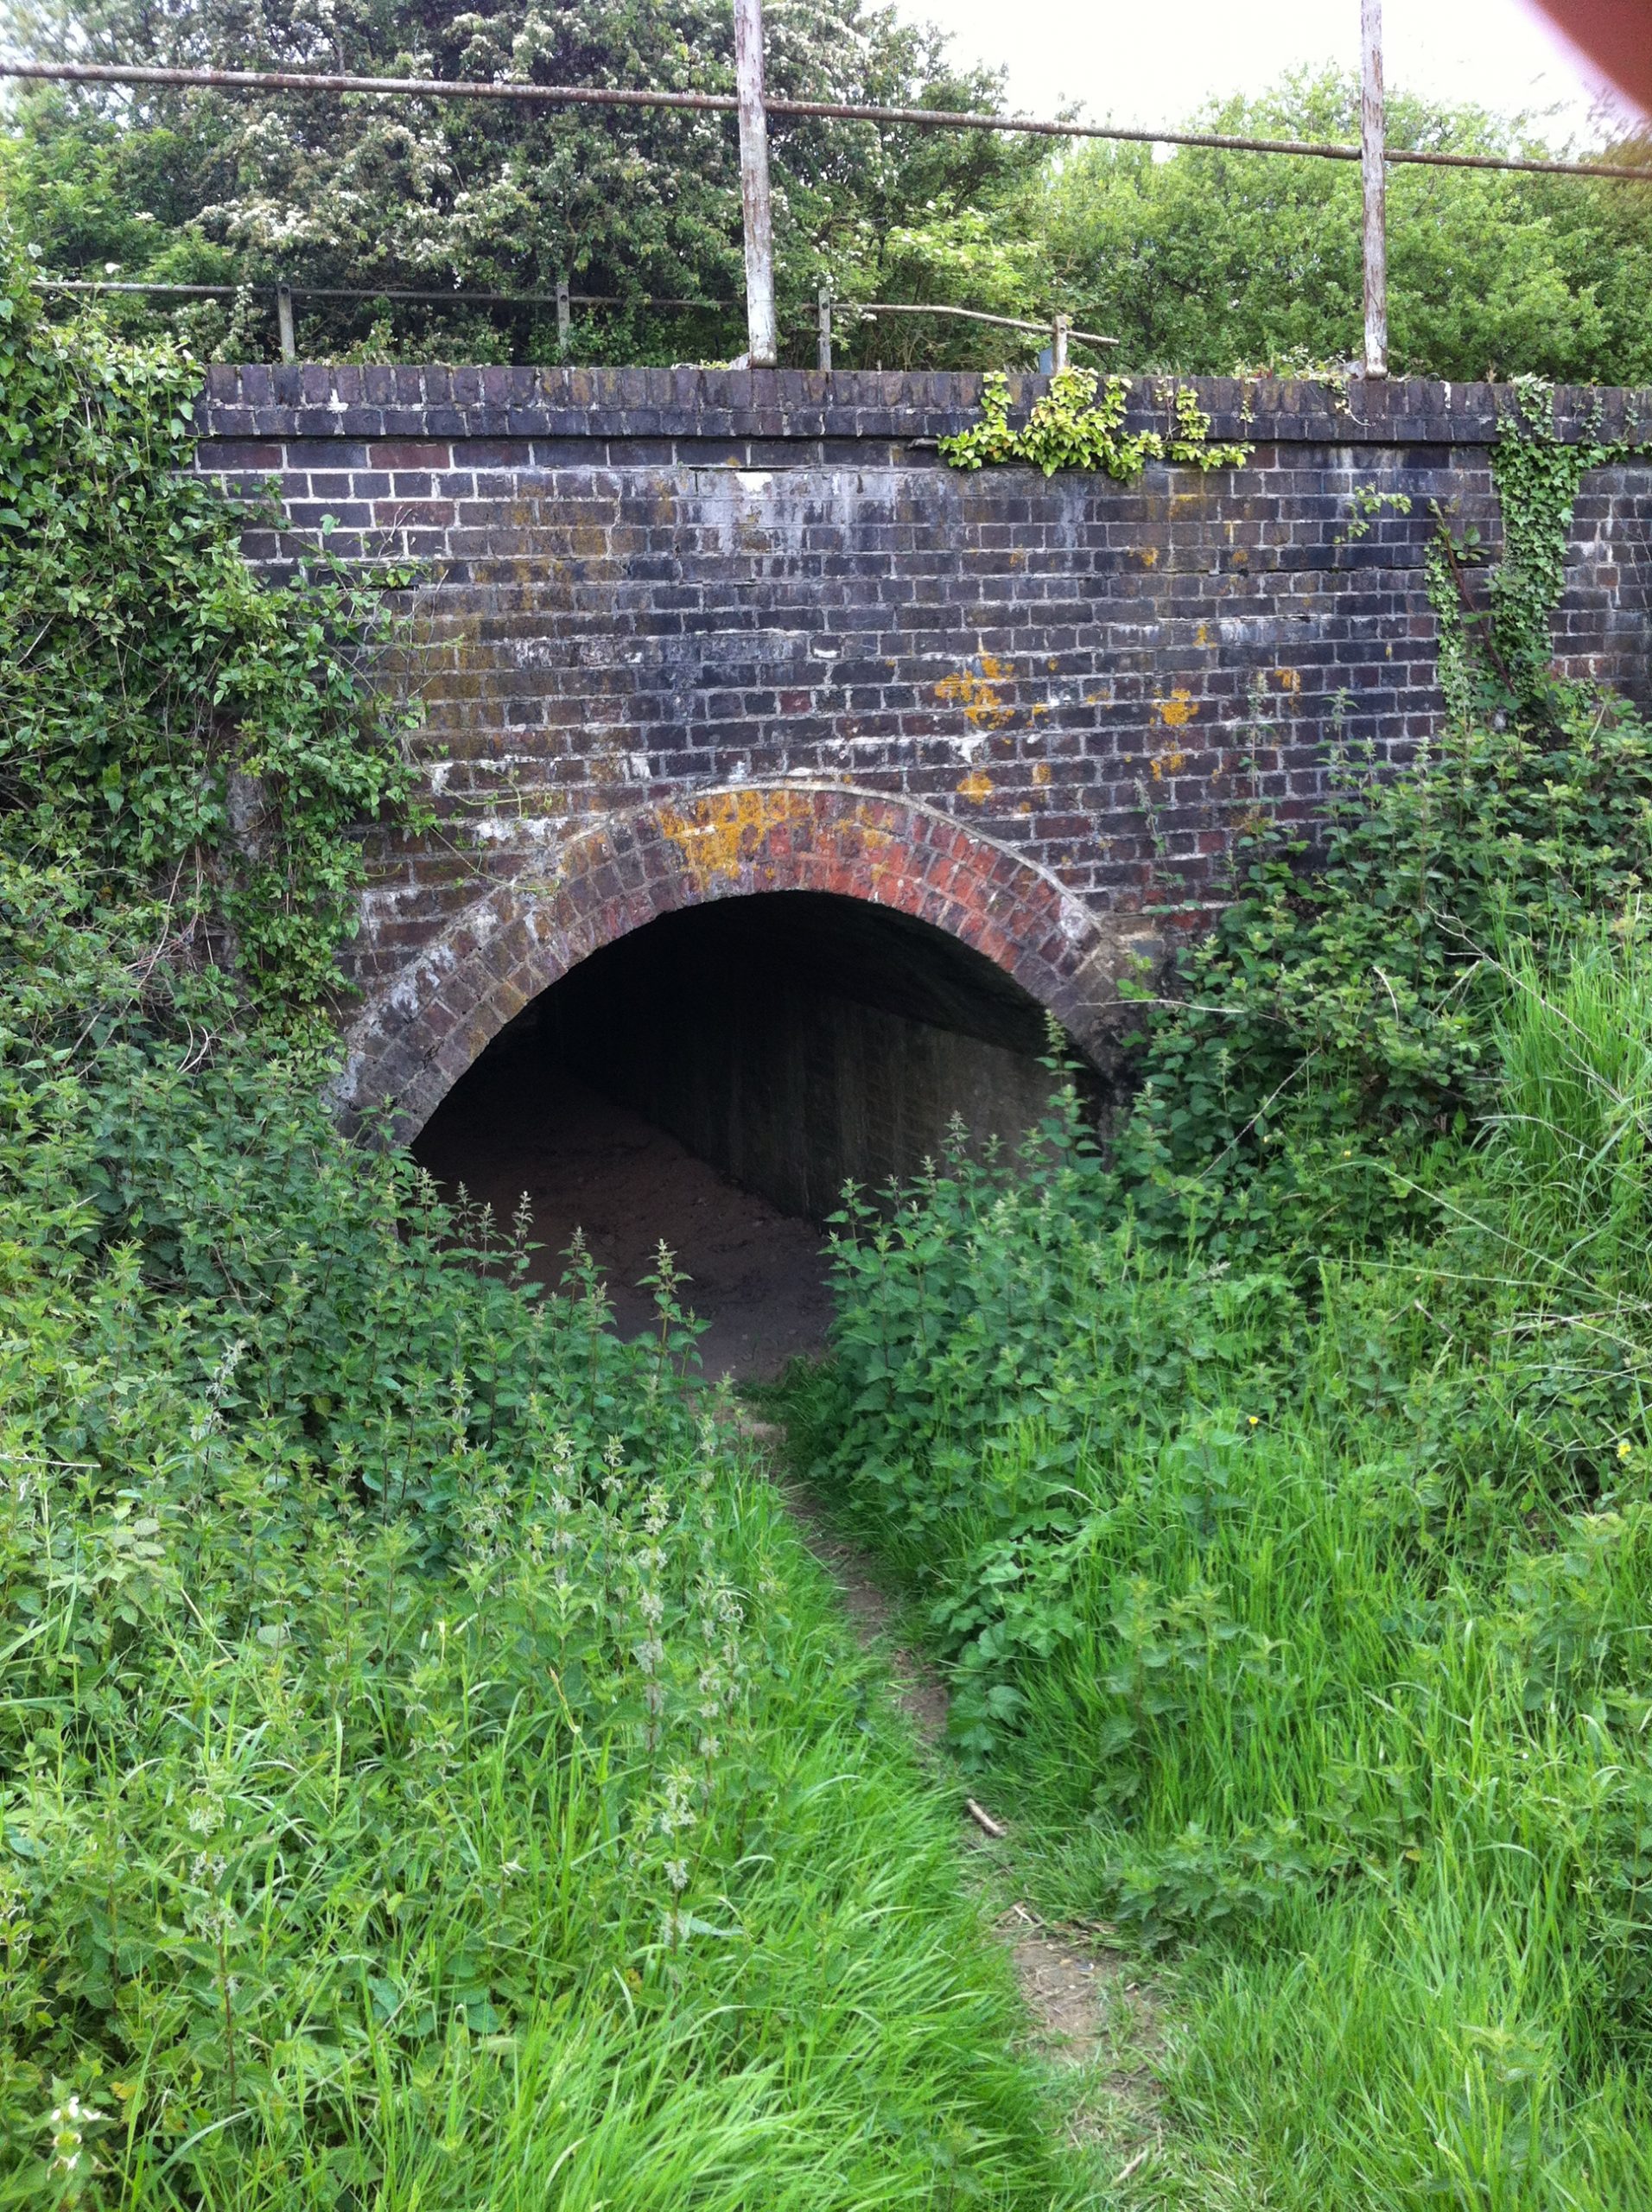 Small arched tunnel under railway line with vegetation encroaching from the sides